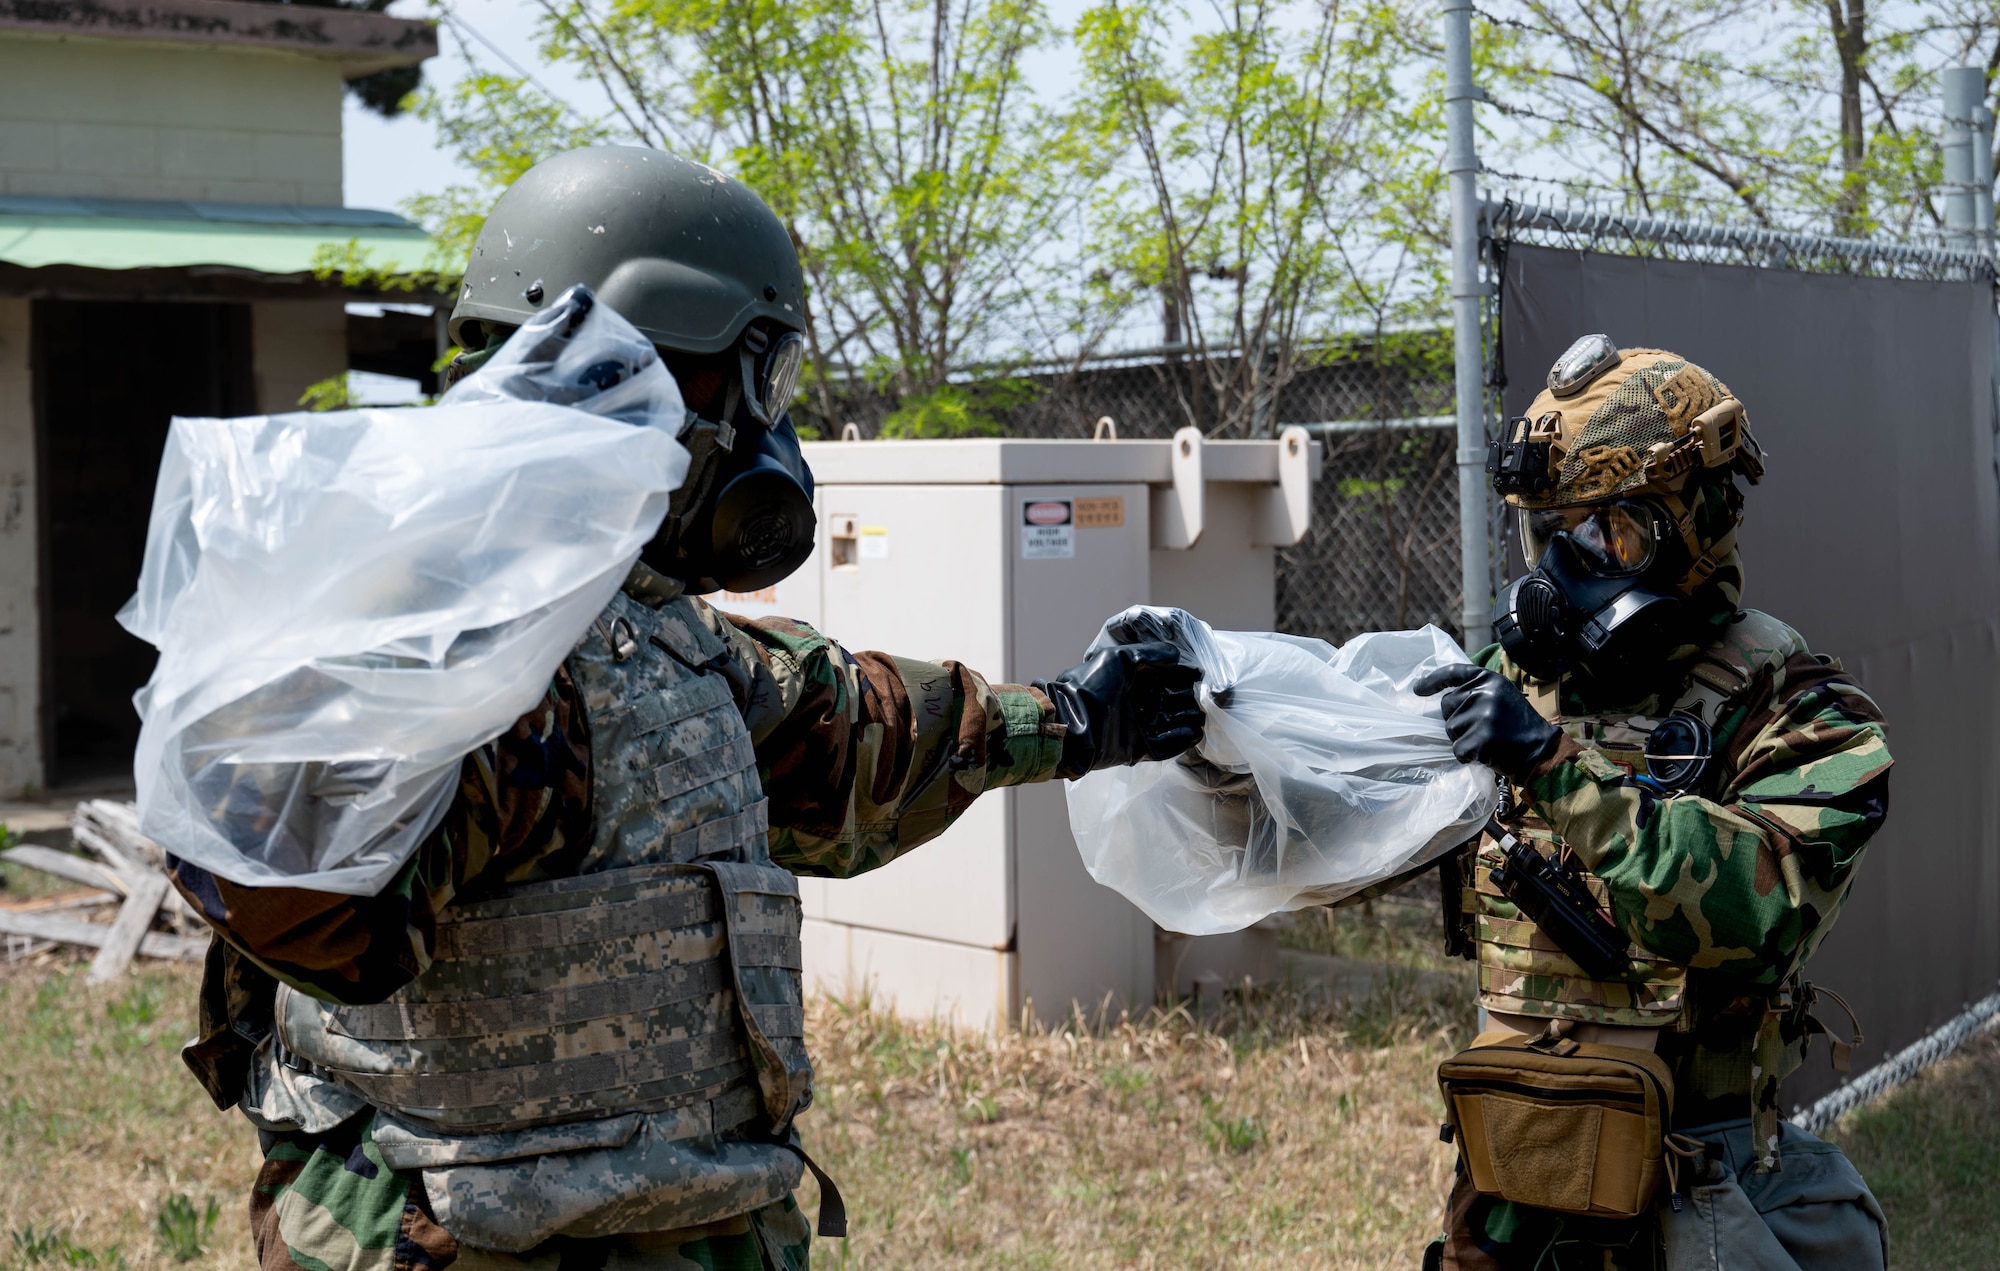 Senior Airman D’andre Goodson (right), 8th Civil Engineer Squadron explosive ordnance disposal technician, assists Airman 1st Class James Devlin (left), 8th CES EOD technician, with donning protective plastic coverings at Kunsan Air Base, Republic of Korea, April 20, 2023. The coverings provide extra protection to EOD members while they handle hazardous materials. (U.S. Air Force photo illustration by Senior Airman Shannon Braaten)